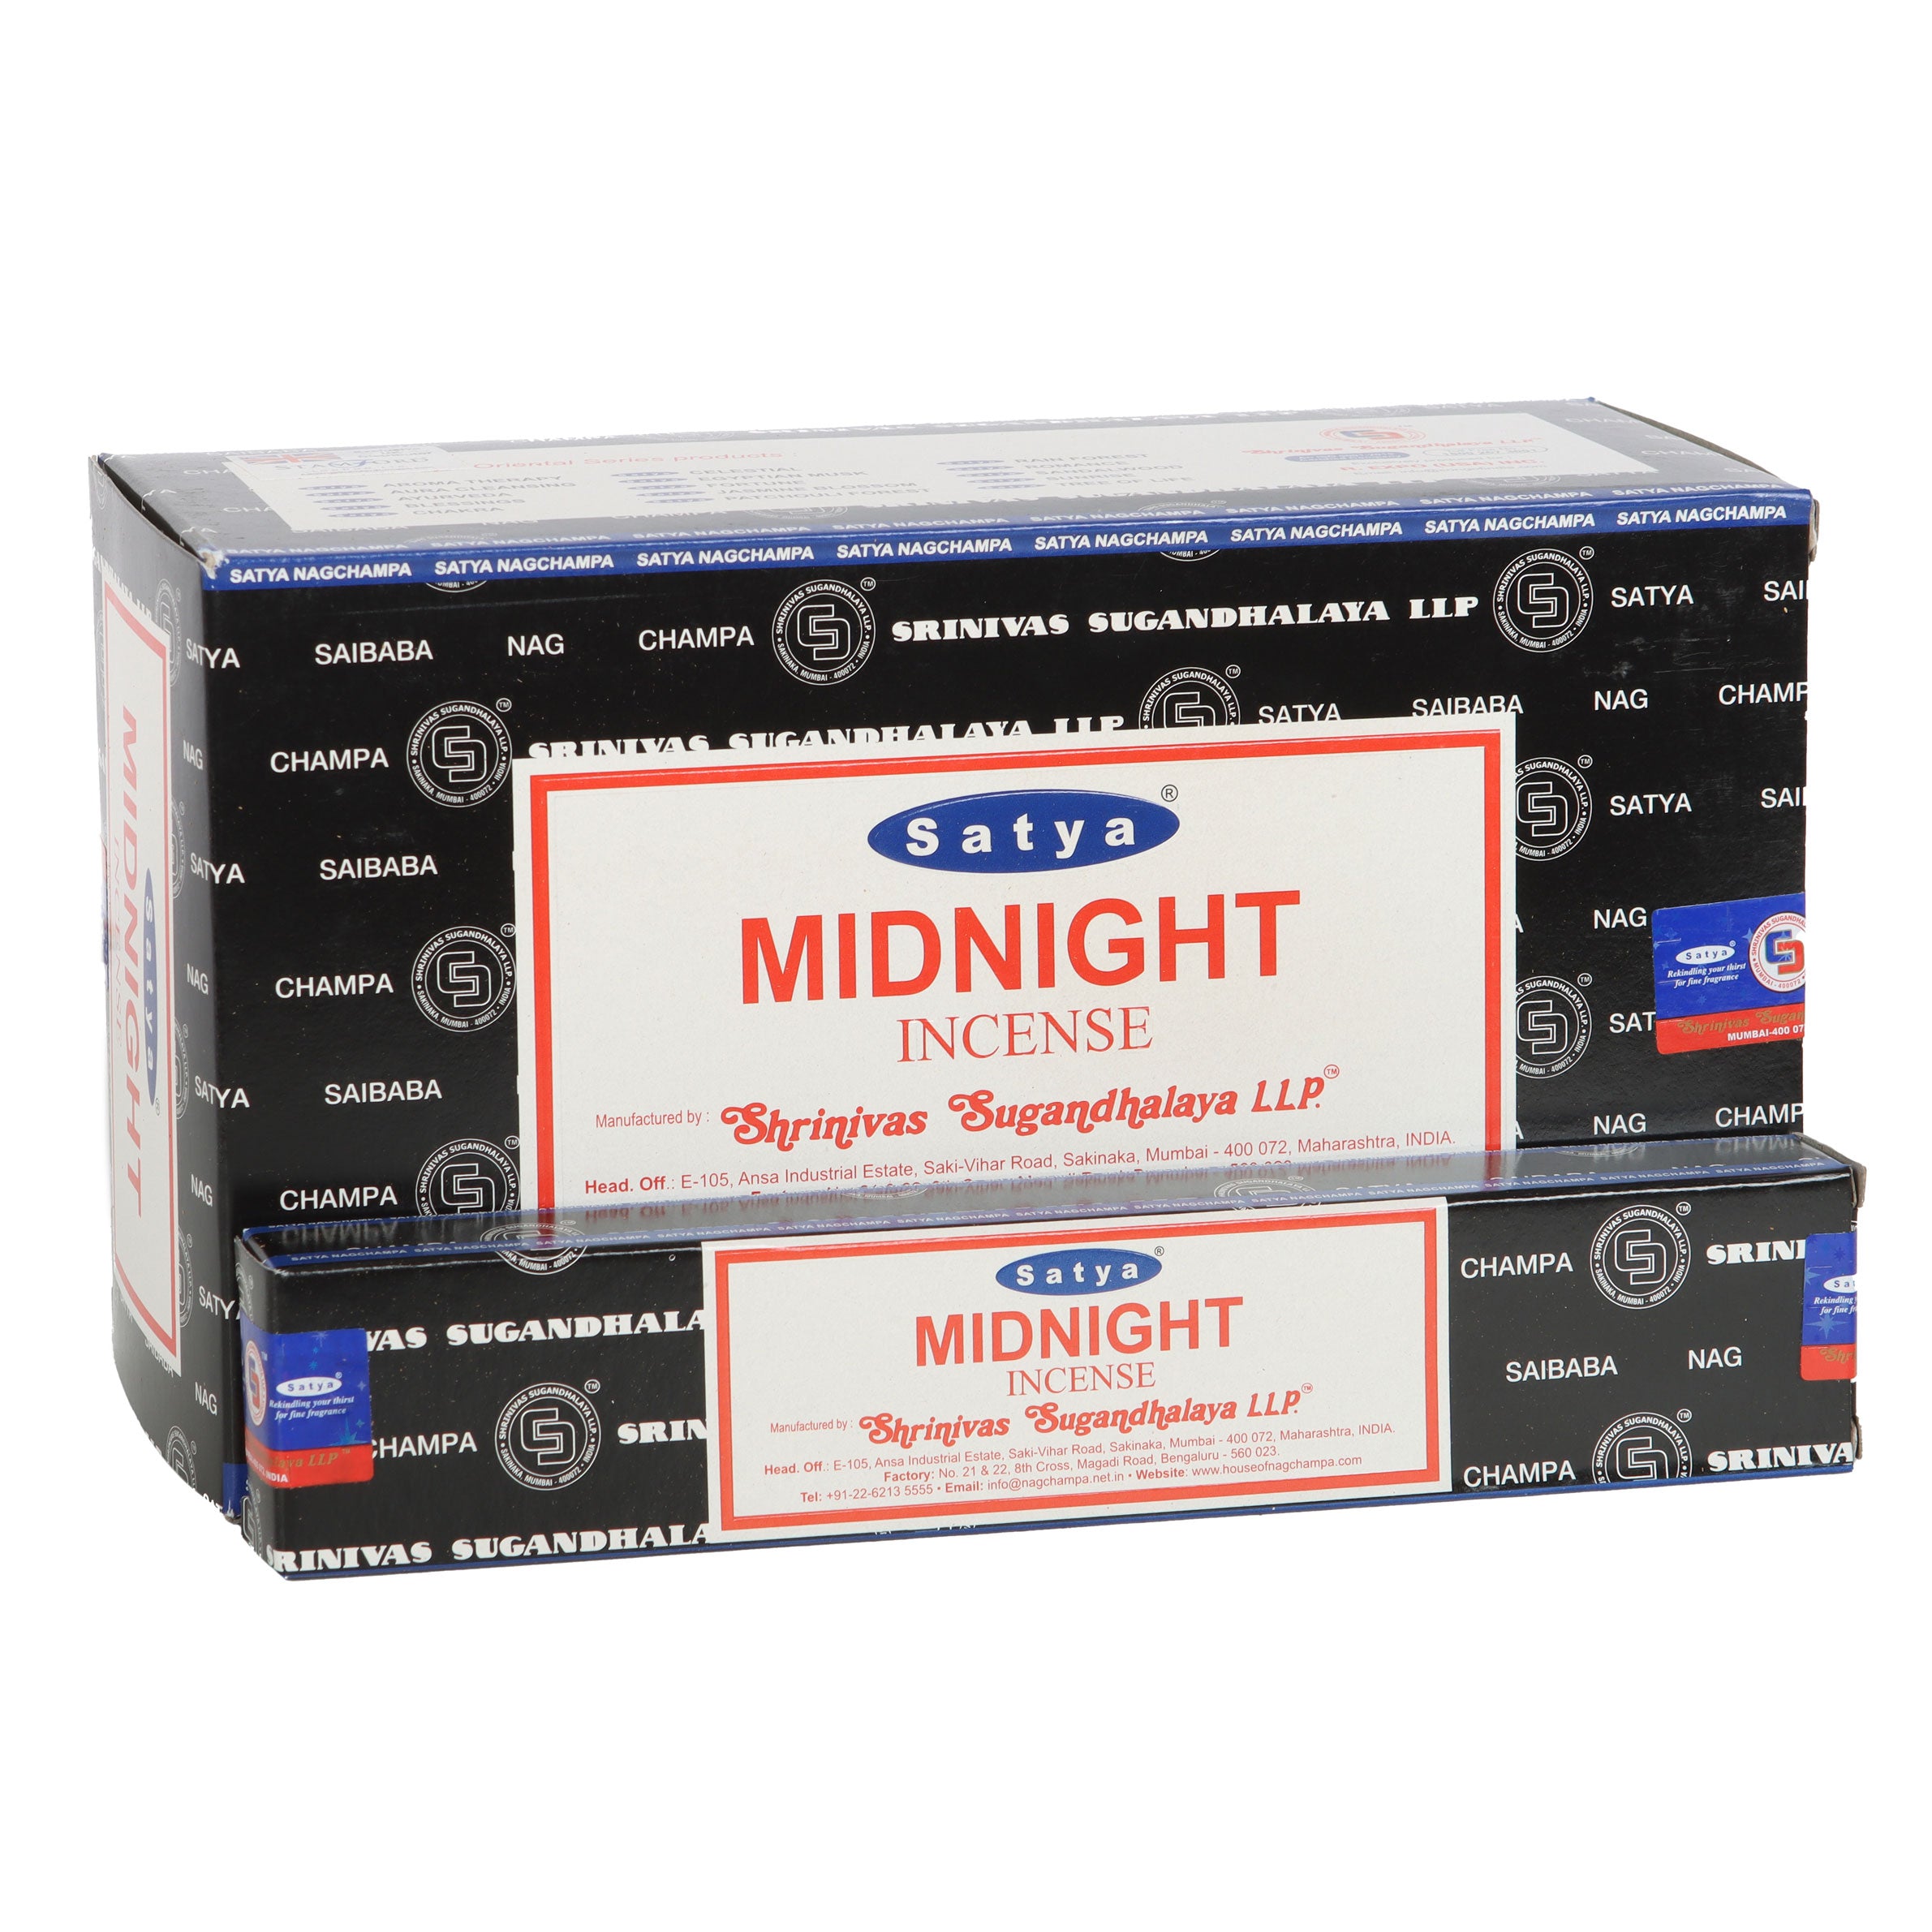 View 12 Packs of Midnight Incense Sticks by Satya information